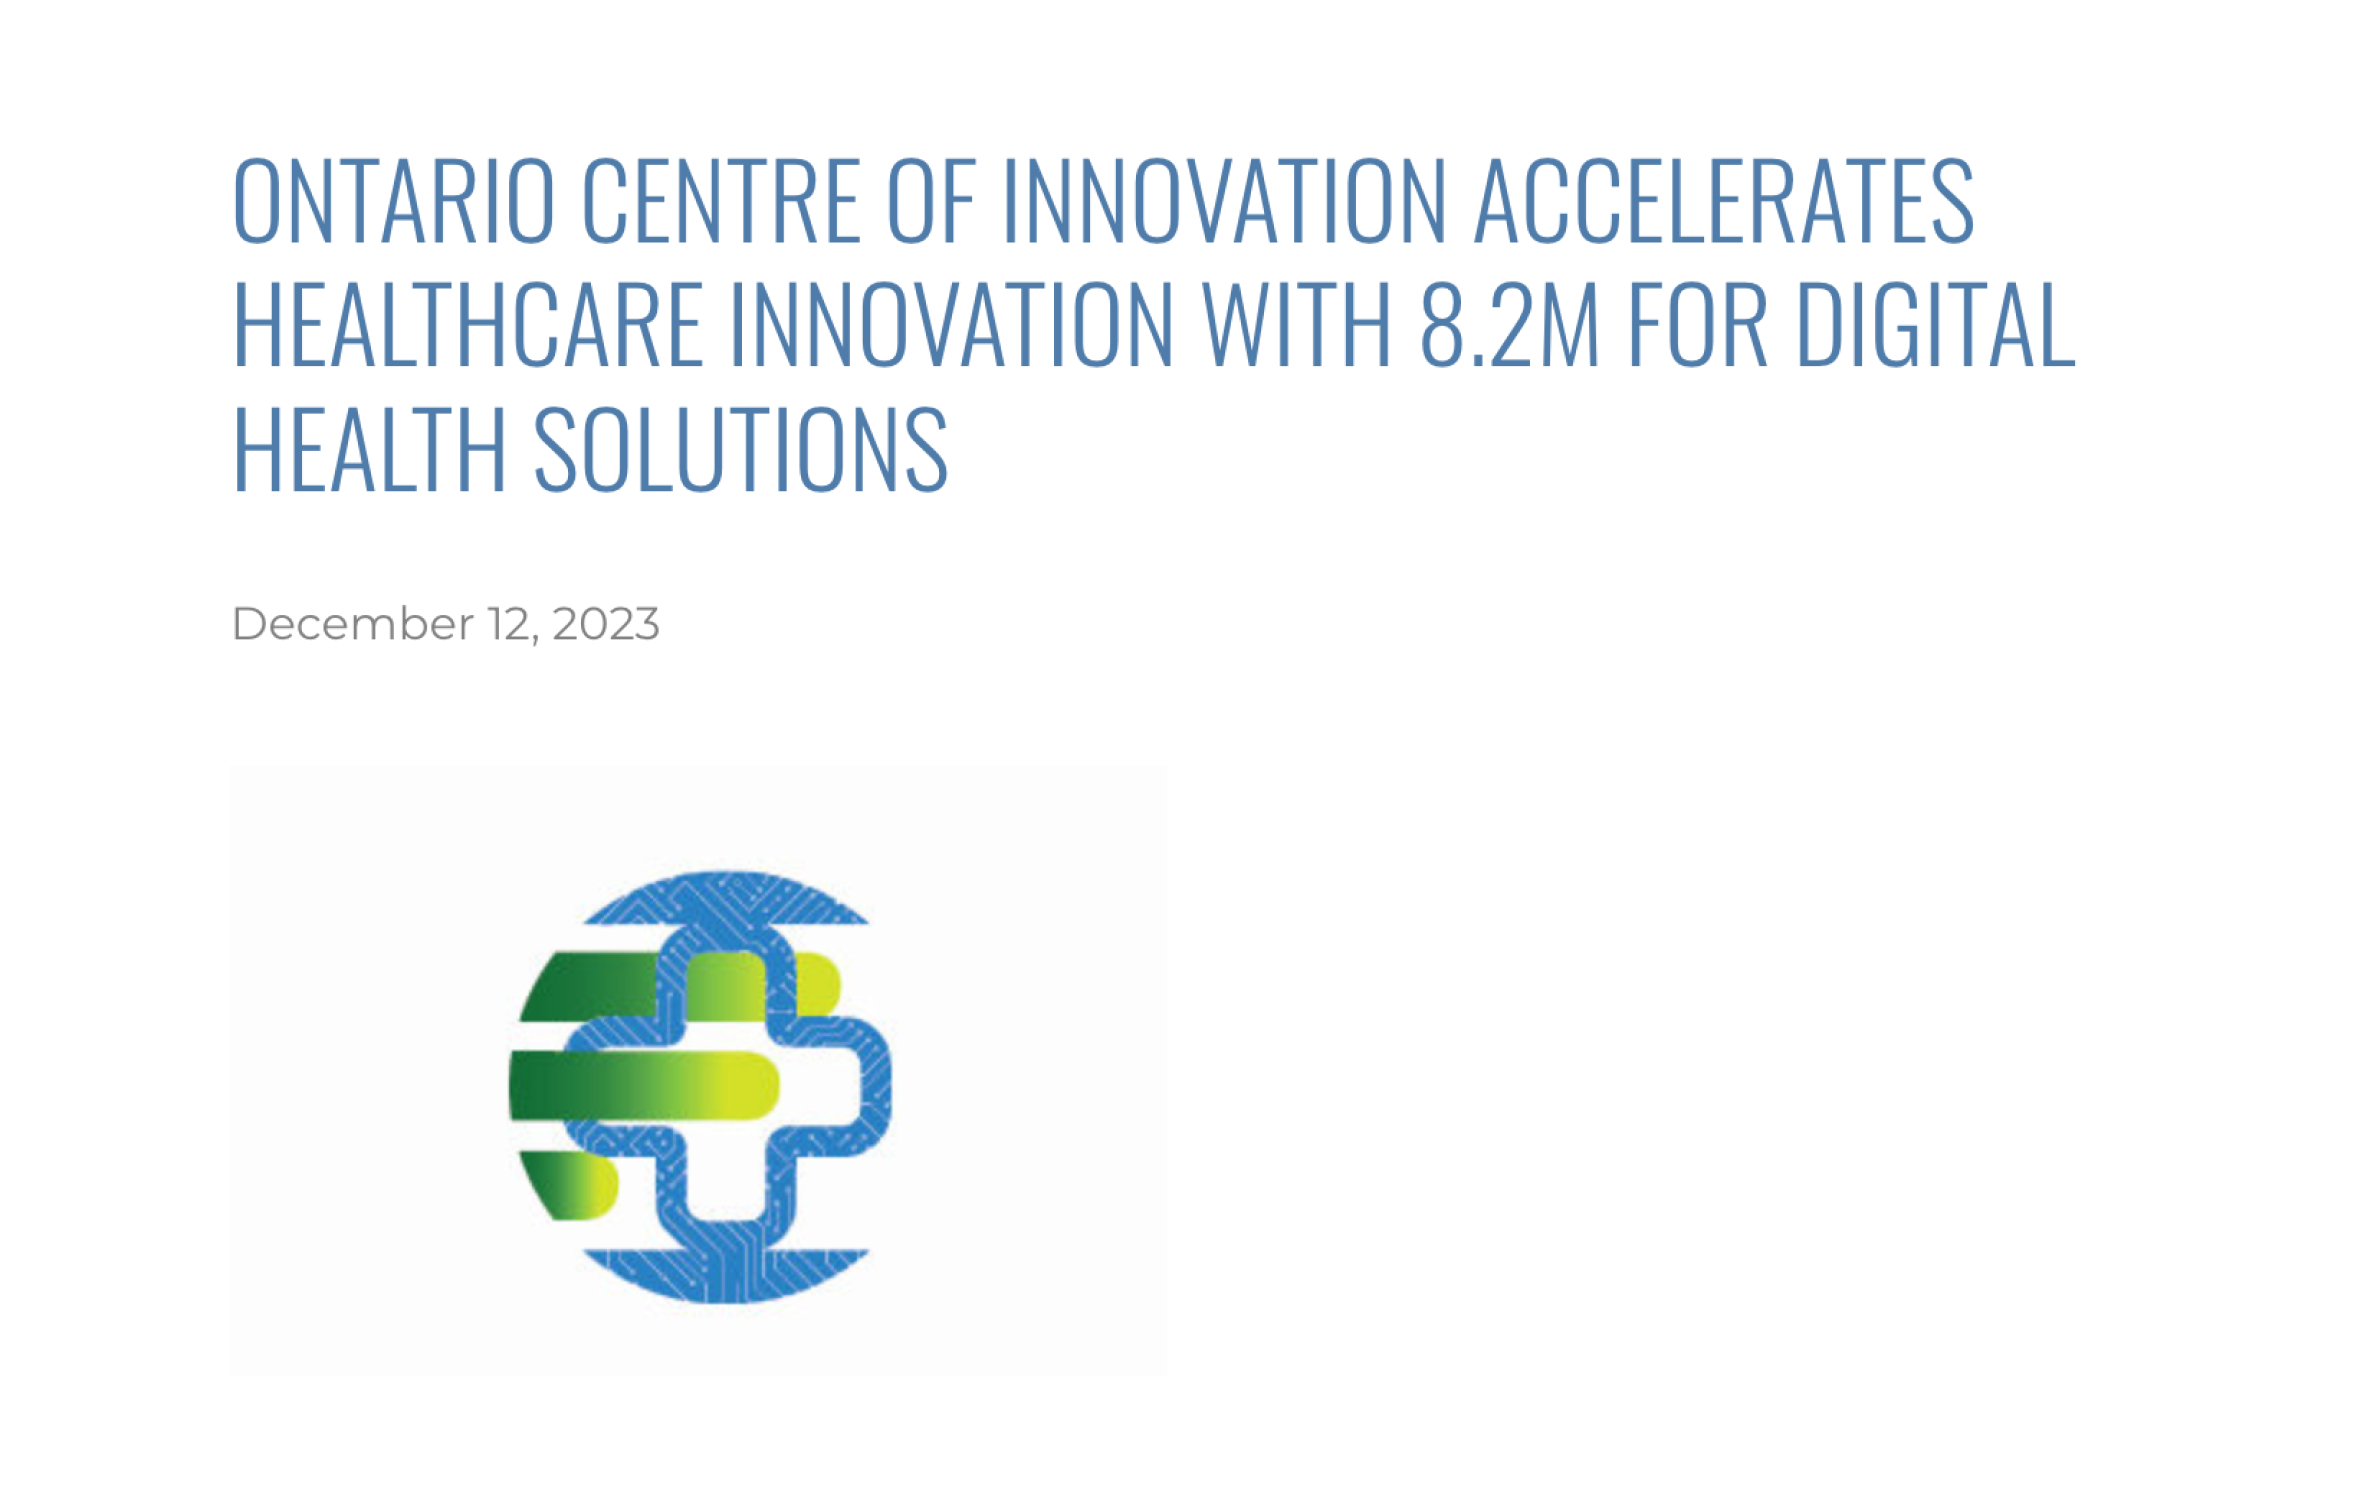 Ontario Centre of Innovation Accelerates Healthcare Innovation with 8.2M for Digital Health Solutions